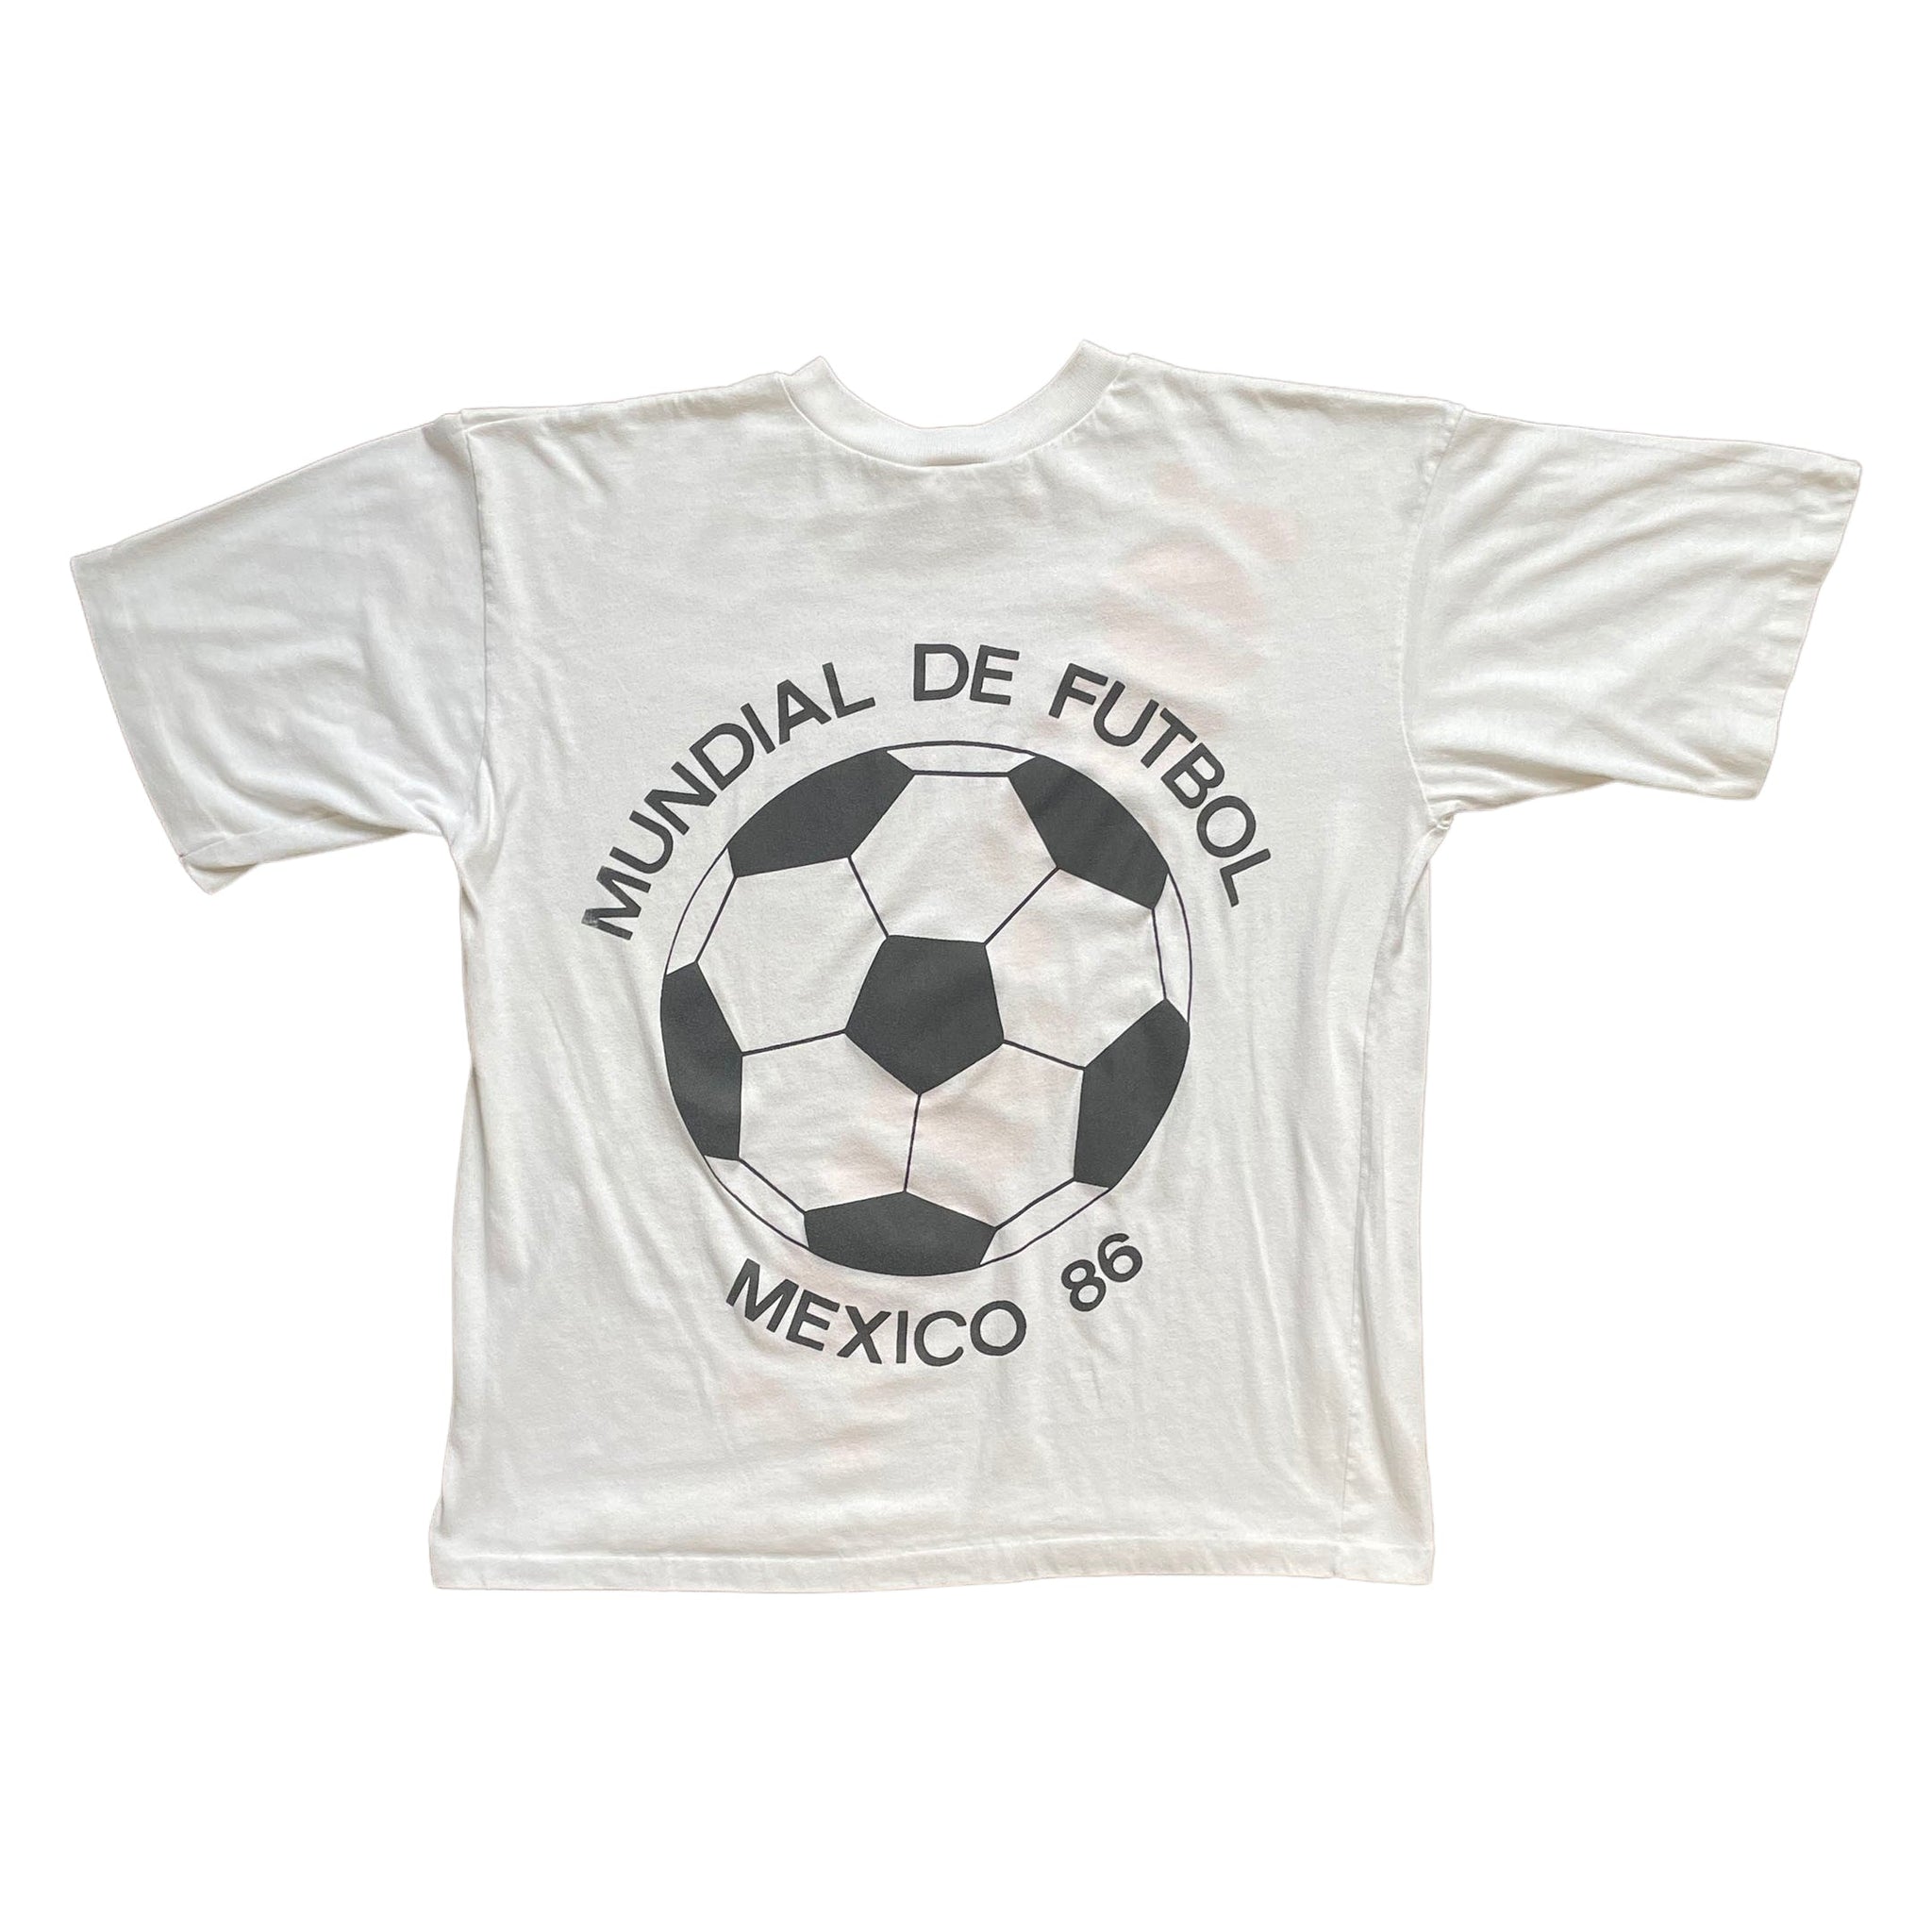 Mexico 86 "¡OFF-SIDE!" T-Shirt - L